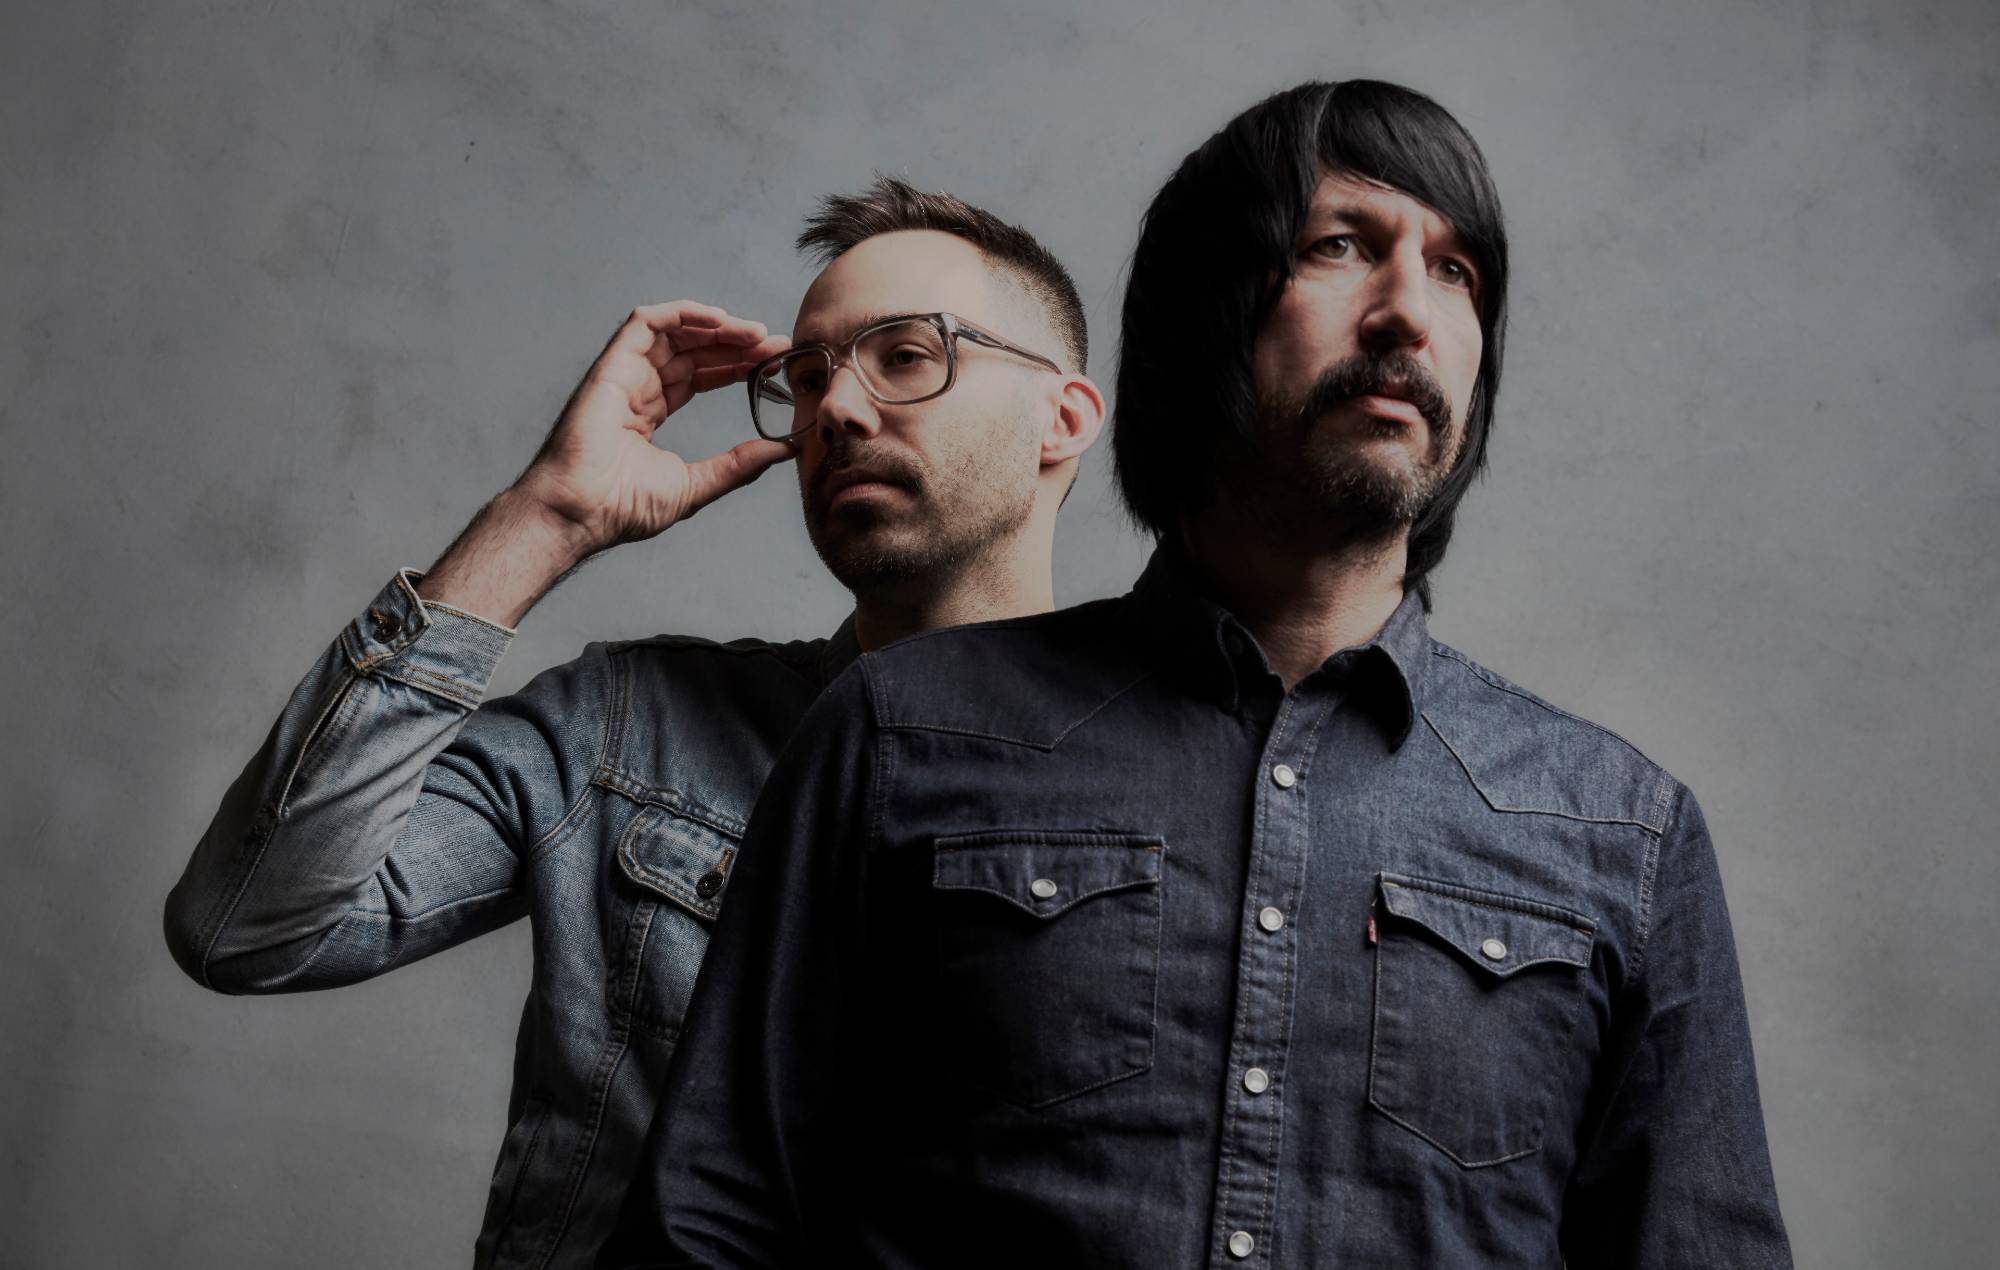 Death From Above 1979: “What happens if a metal band were recorded like The Beatles?”